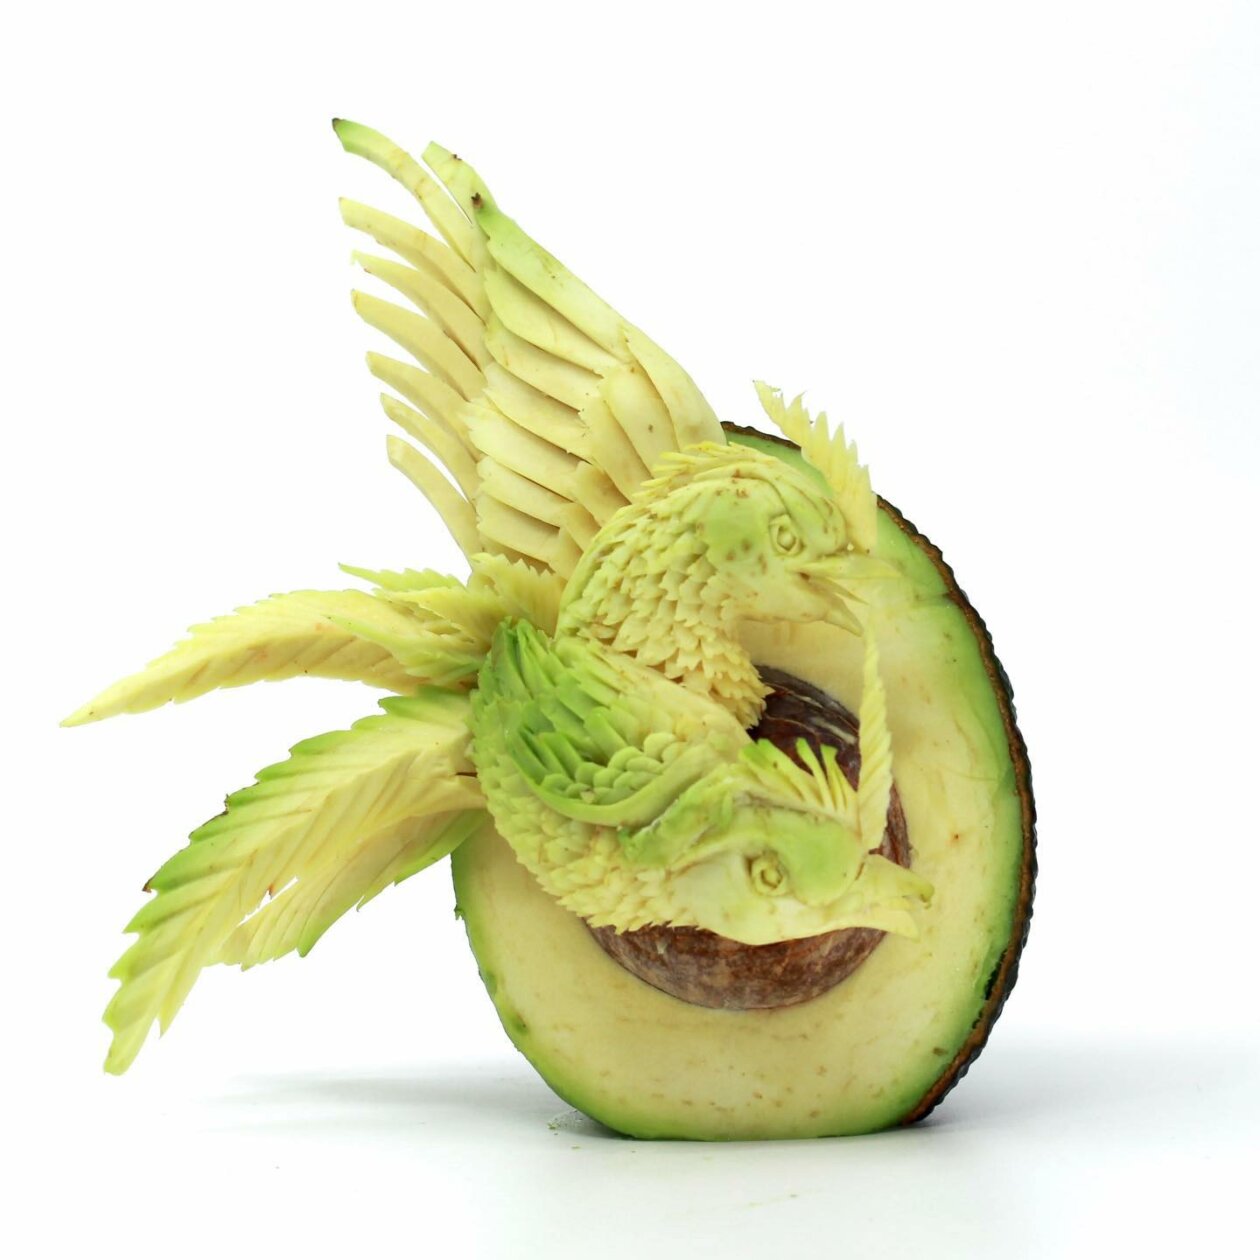 Superb Fruit And Vegetable Carvings By Daniele Barresi 22